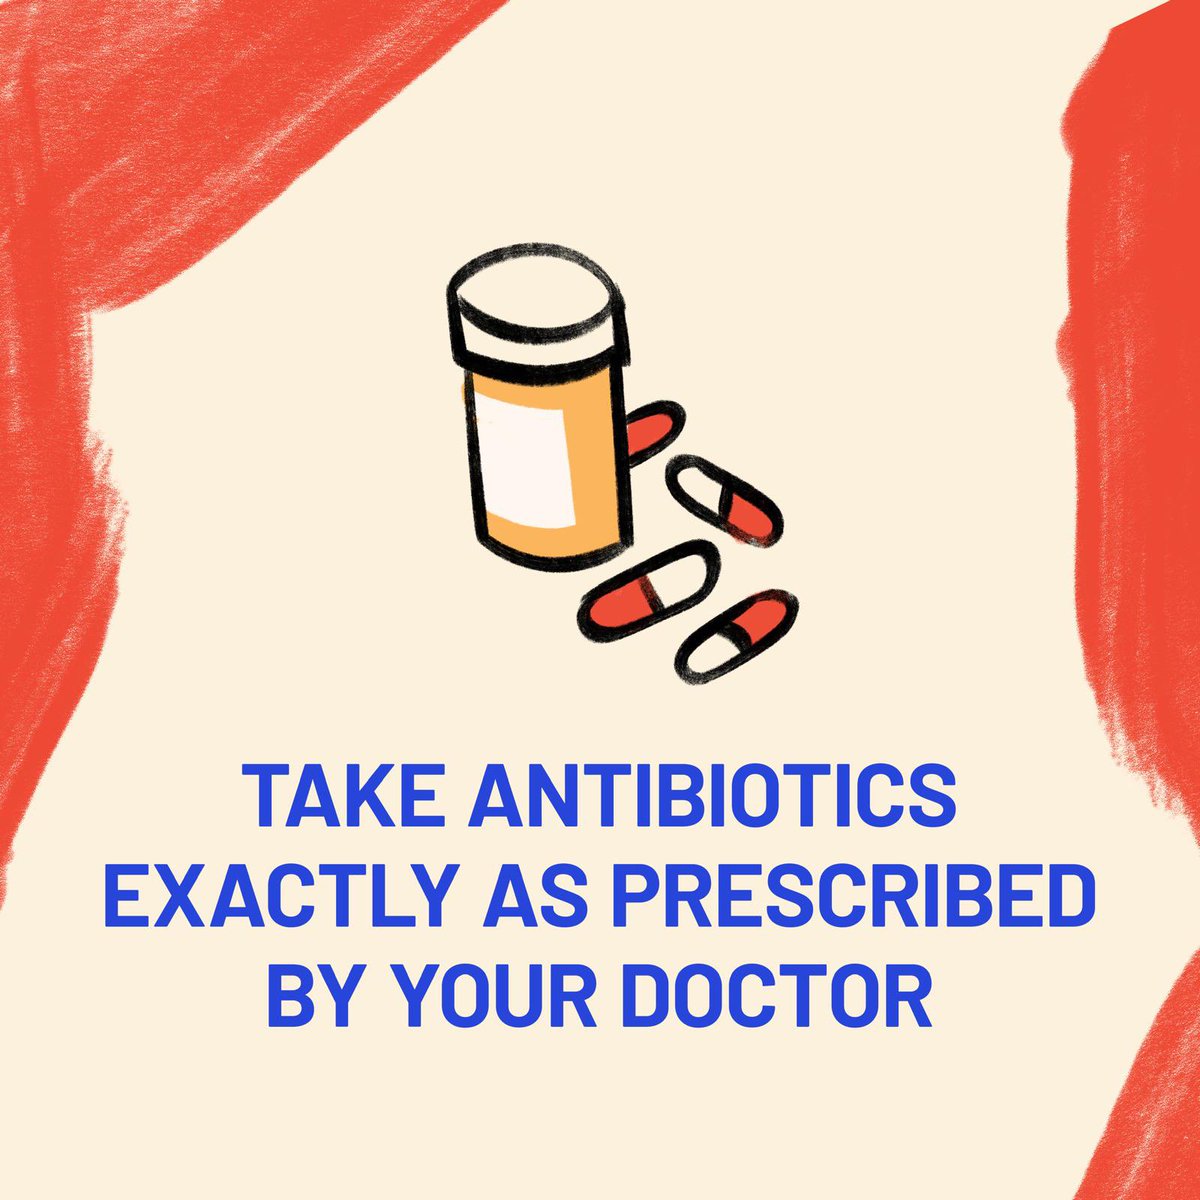 Three ways you can help prevent #AntimicrobialResistance
-Get vaccinated 
-Wash your hands regularly 
-Take #Antibiotics exactly as prescribed by  your doctor 
#AntibioticResistance #AMR 
@rbainitiative